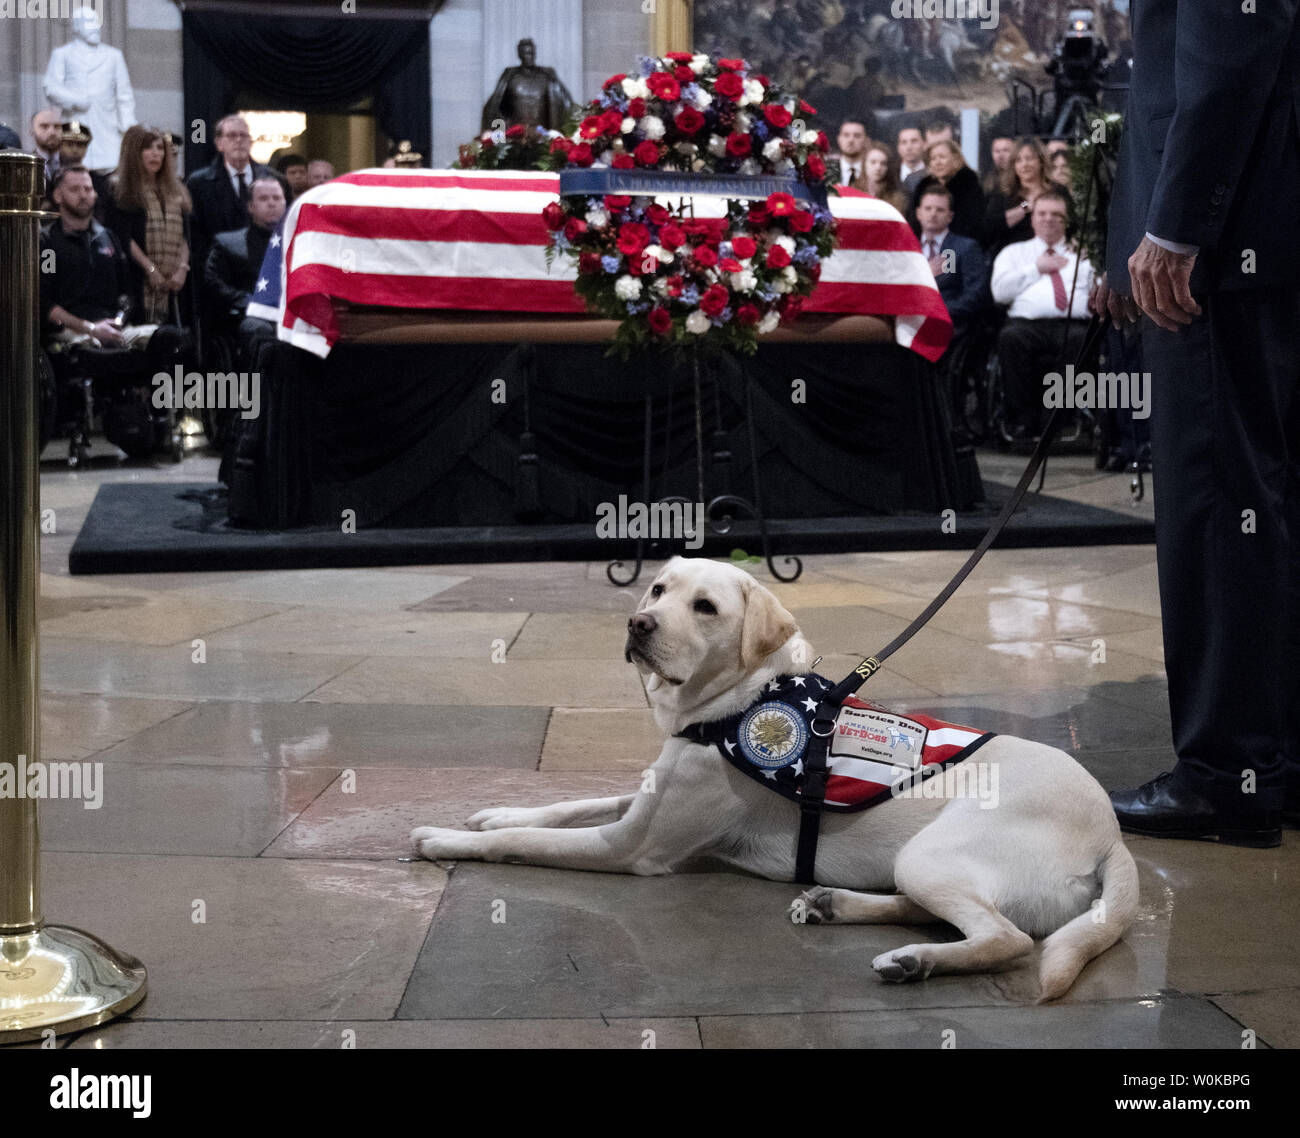 Sully, the service dog for former President George H. W. Bush, rests in front of the coffin as the 41st president lies in state at the U.S. Capitol Rotunda, in Washington, D.C. on December 4, 2018.  There will be a State Funeral at the National Cathedral on Wednesday, December 5, 2018.   Photo by Pat Benic/UPI Stock Photo